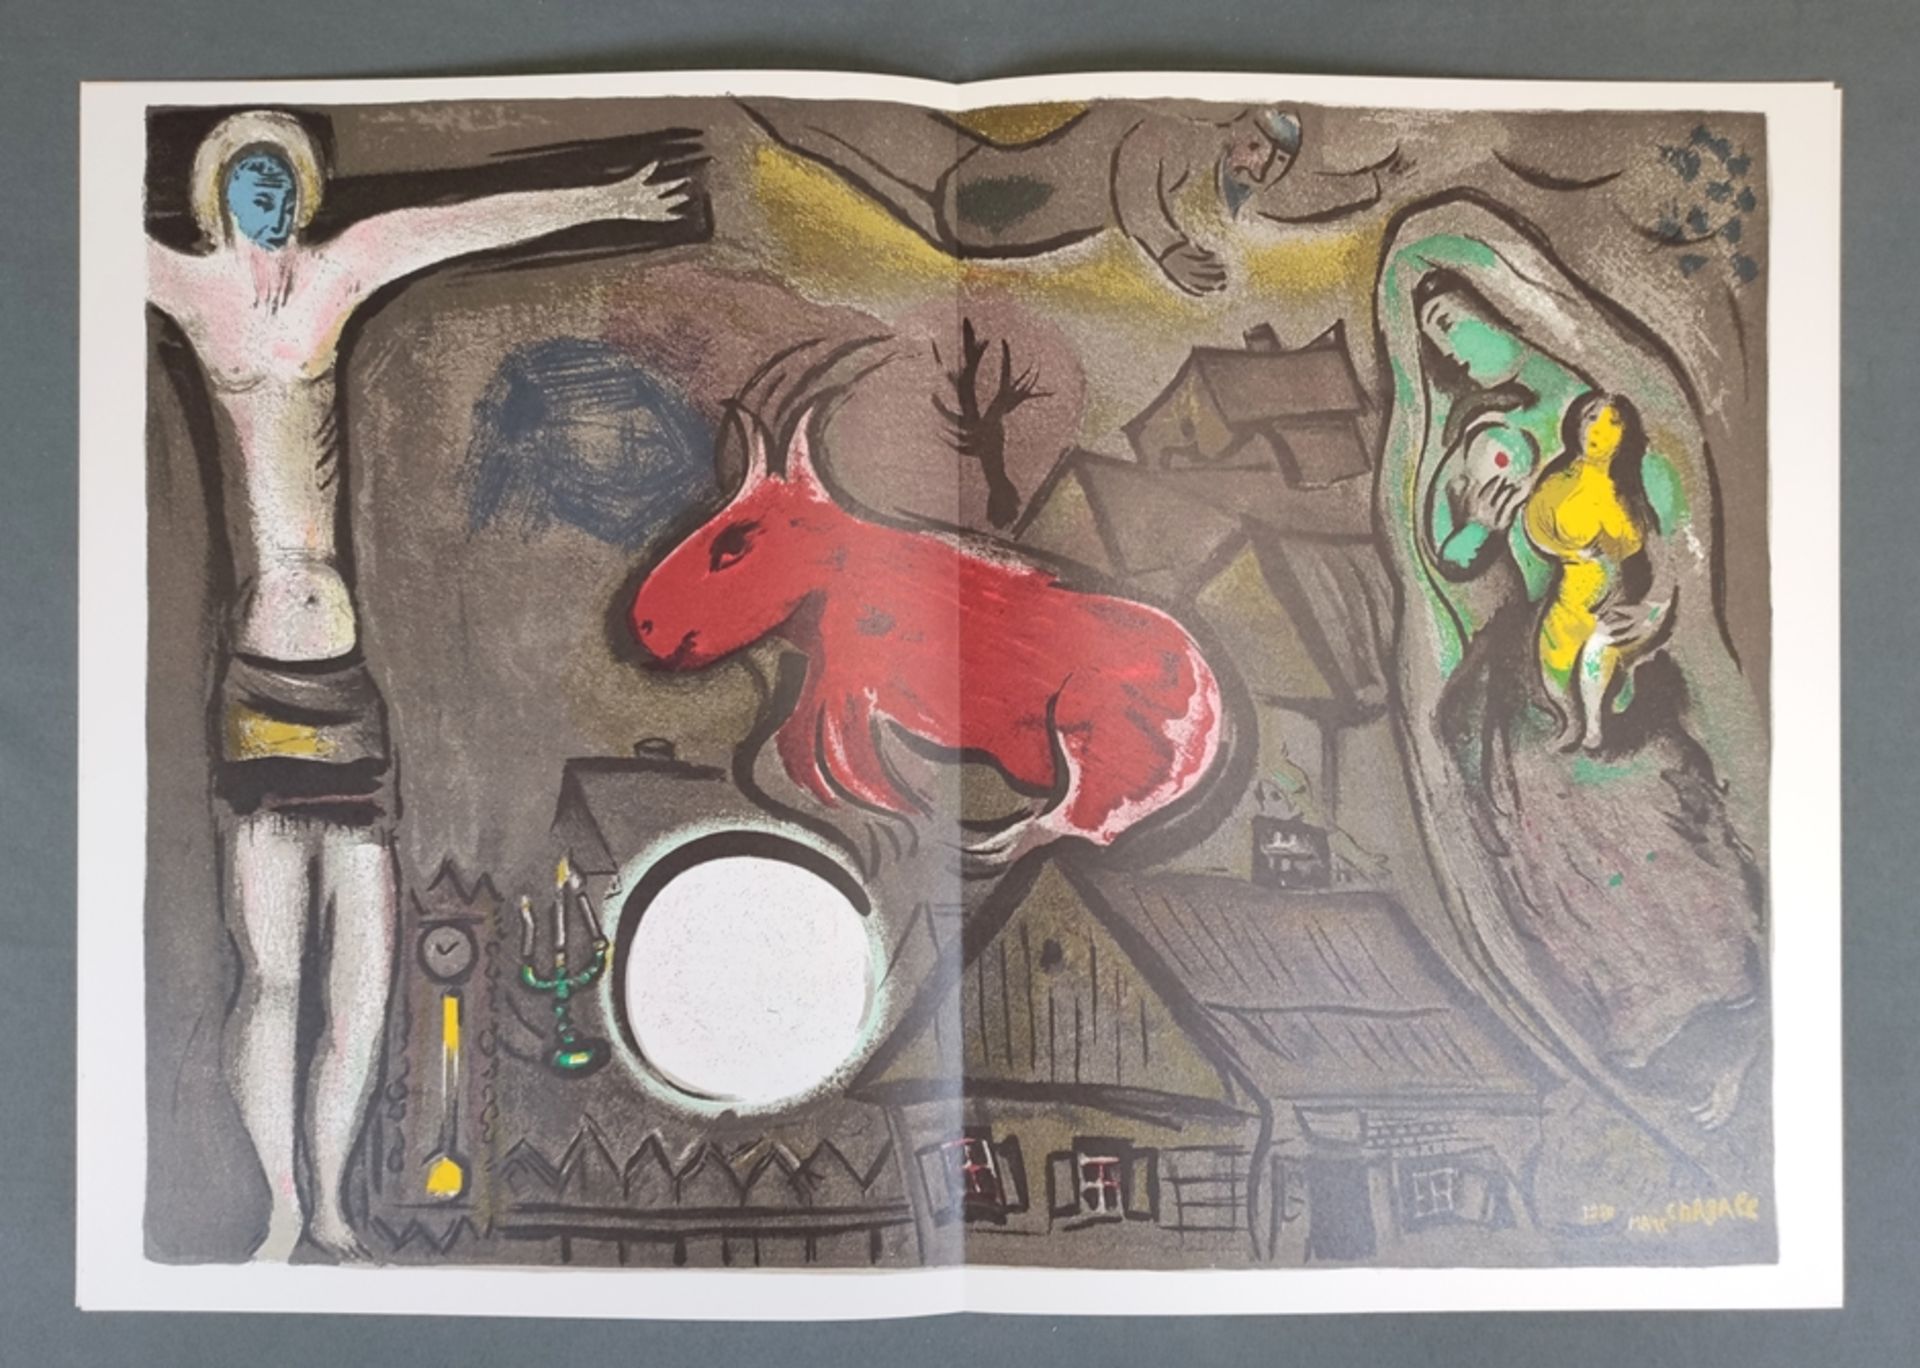 Derriere le Miroir, two issues with original prints by Marc Chagall, no. 235, October 1979, with tw - Image 4 of 4